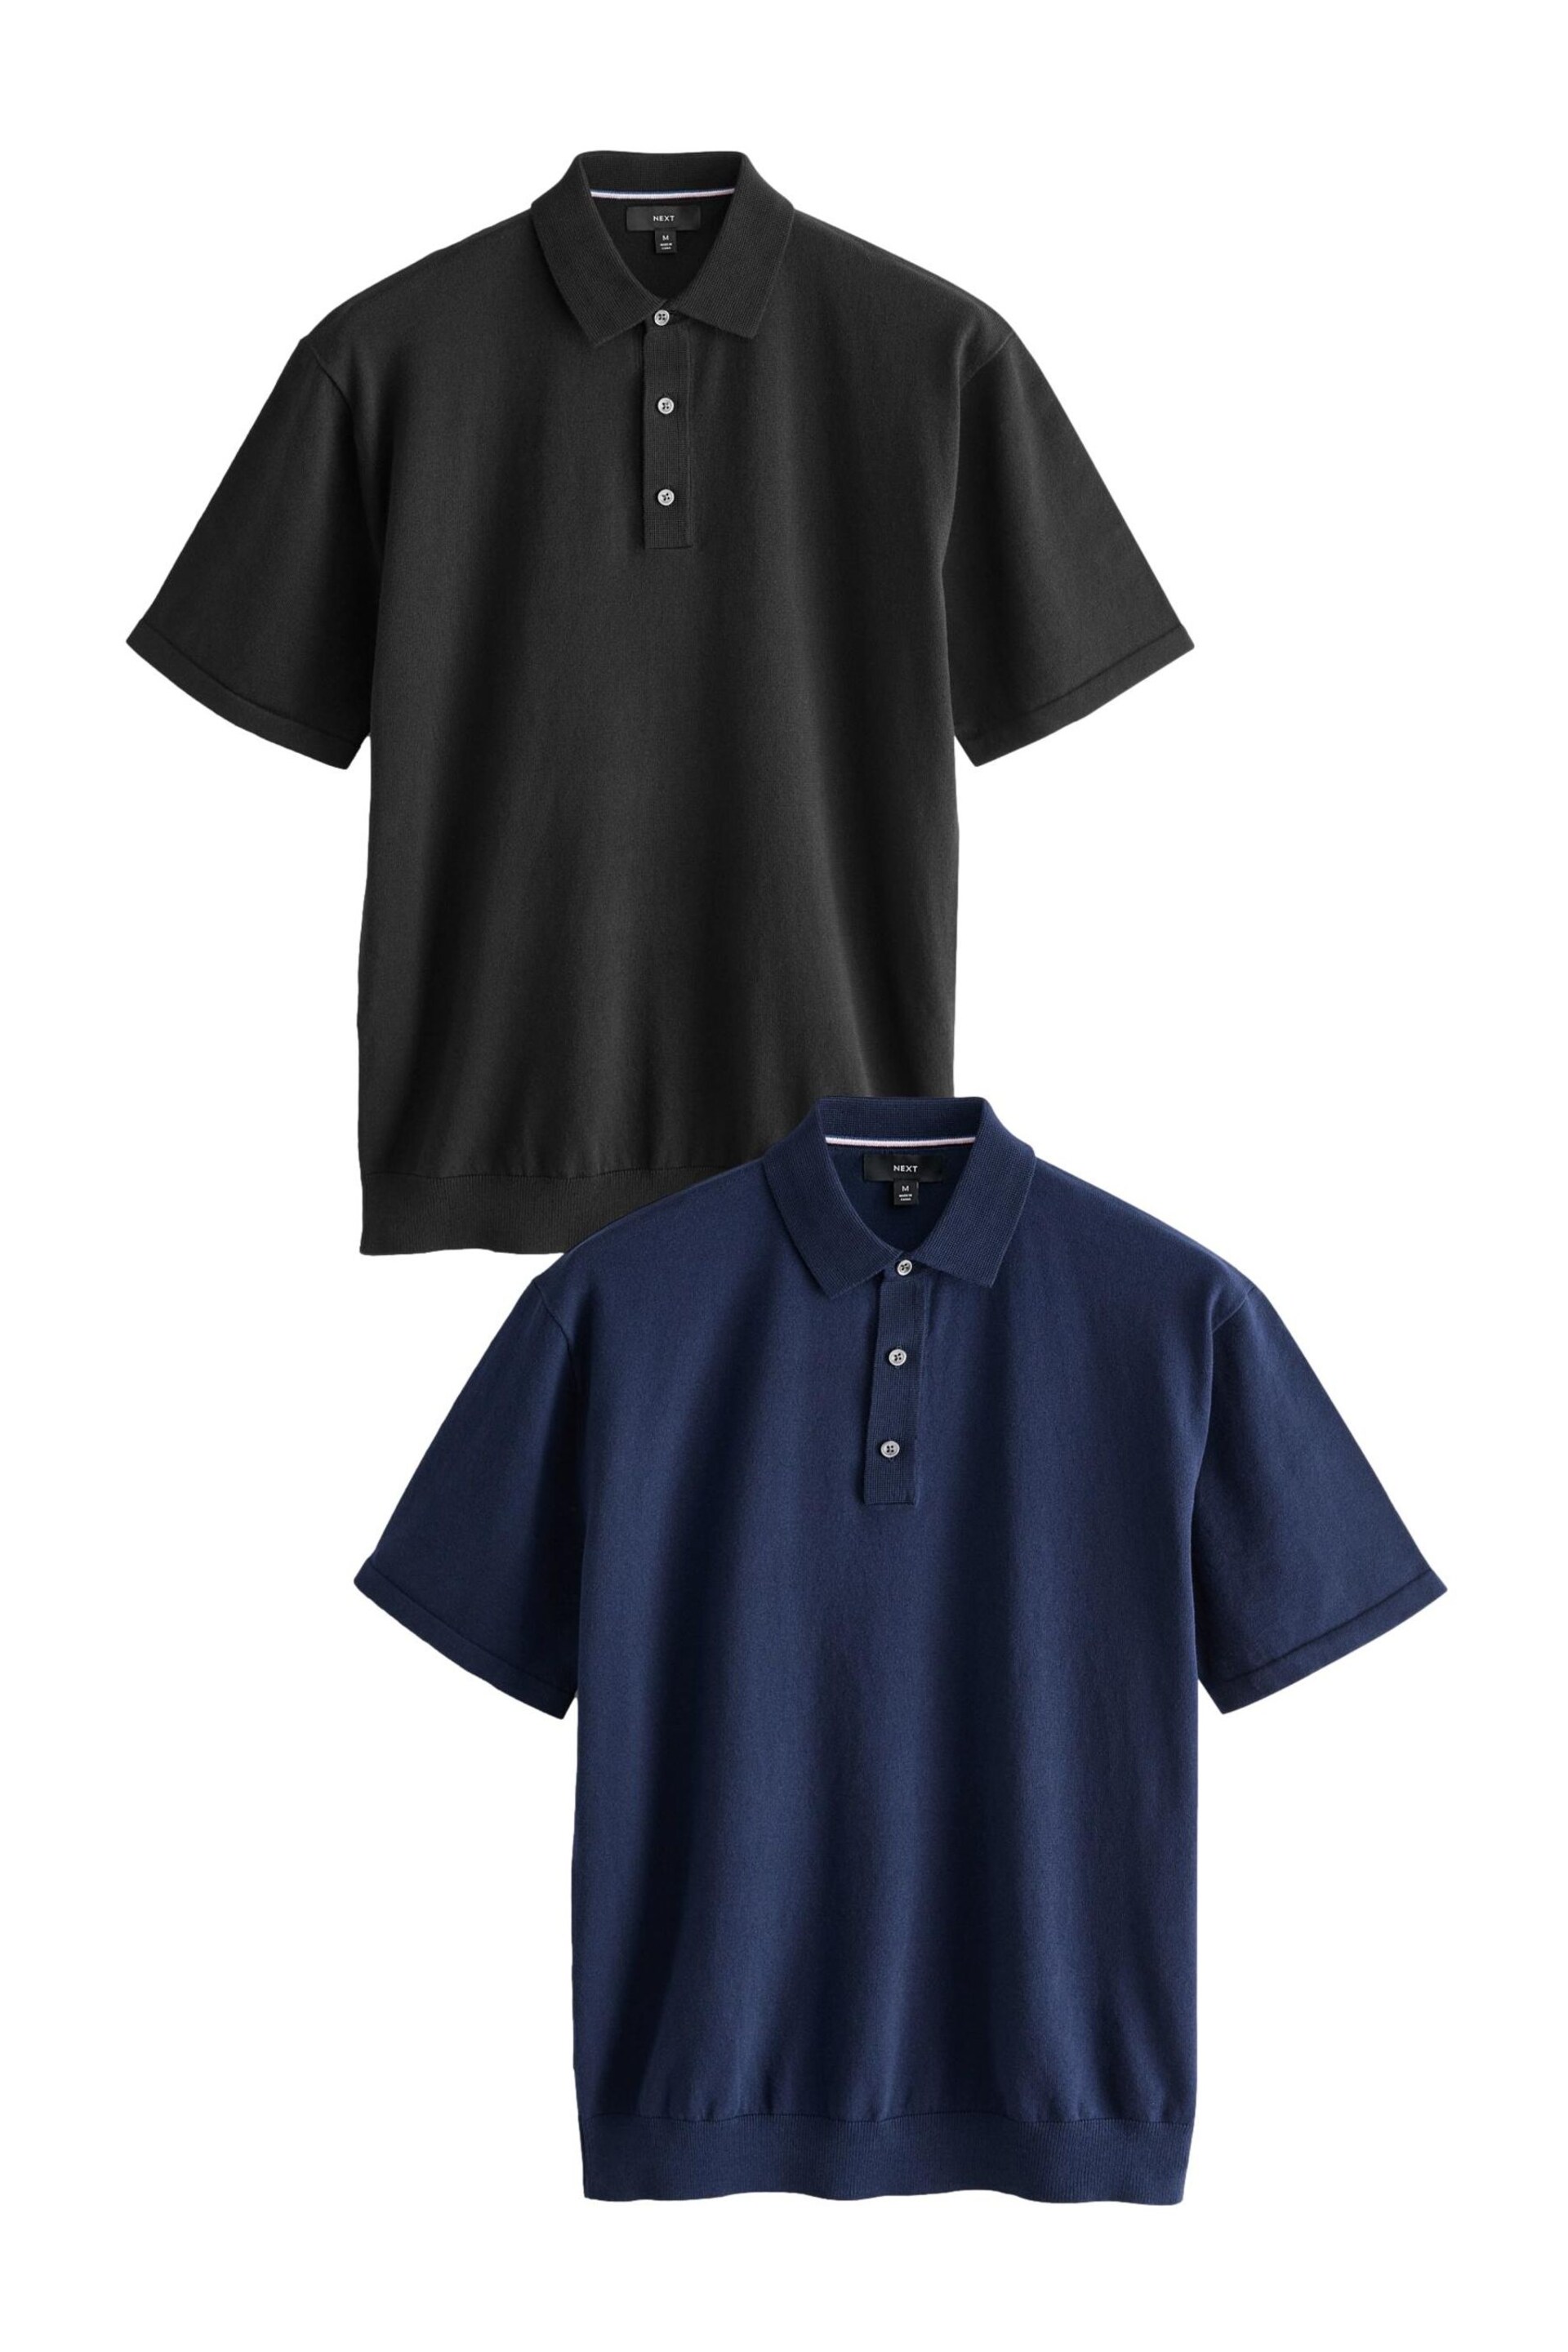 Black/Navy Knitted Regular Fit 2 Pack Polo Shirts - Image 9 of 13